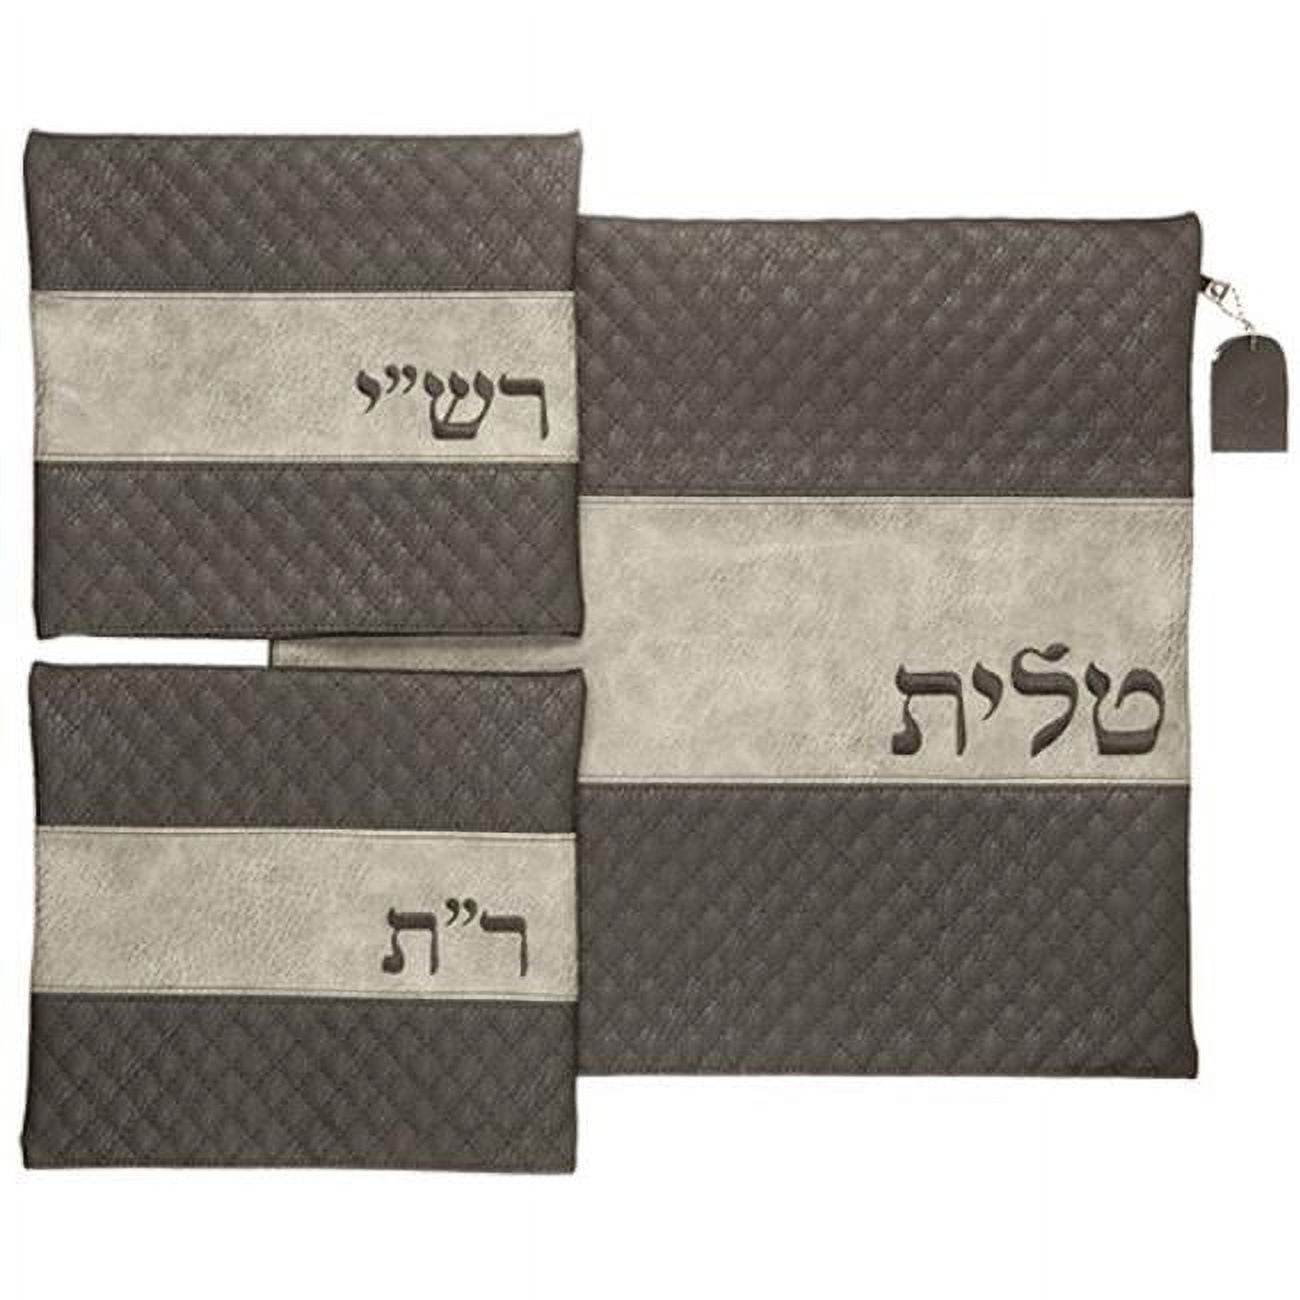 Picture of Art Judaica 65321 17 x 15.5 in. 3 Piece Leather Like Tallit & Tefillin Set with Embroidery